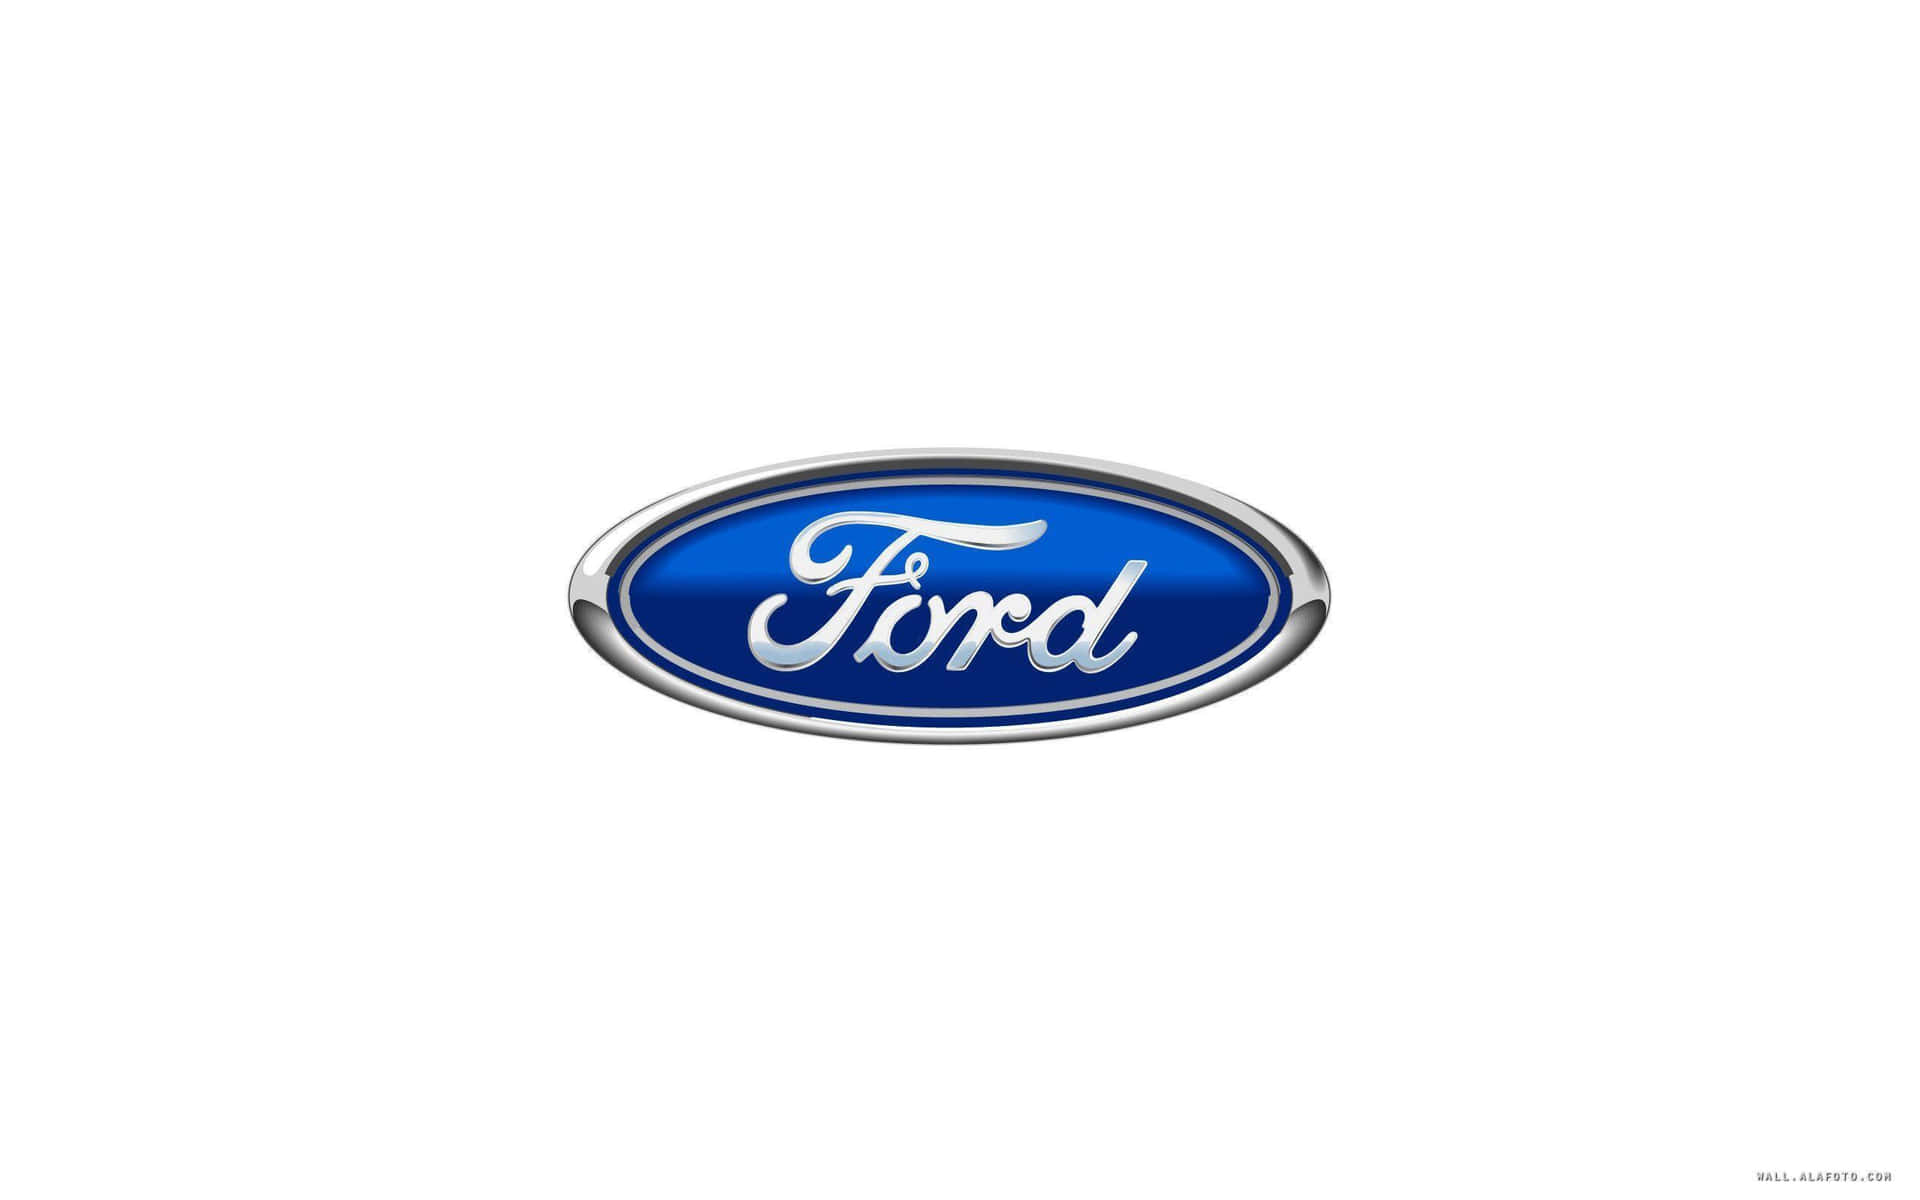 Caption: Ford Logo in High Definition Wallpaper